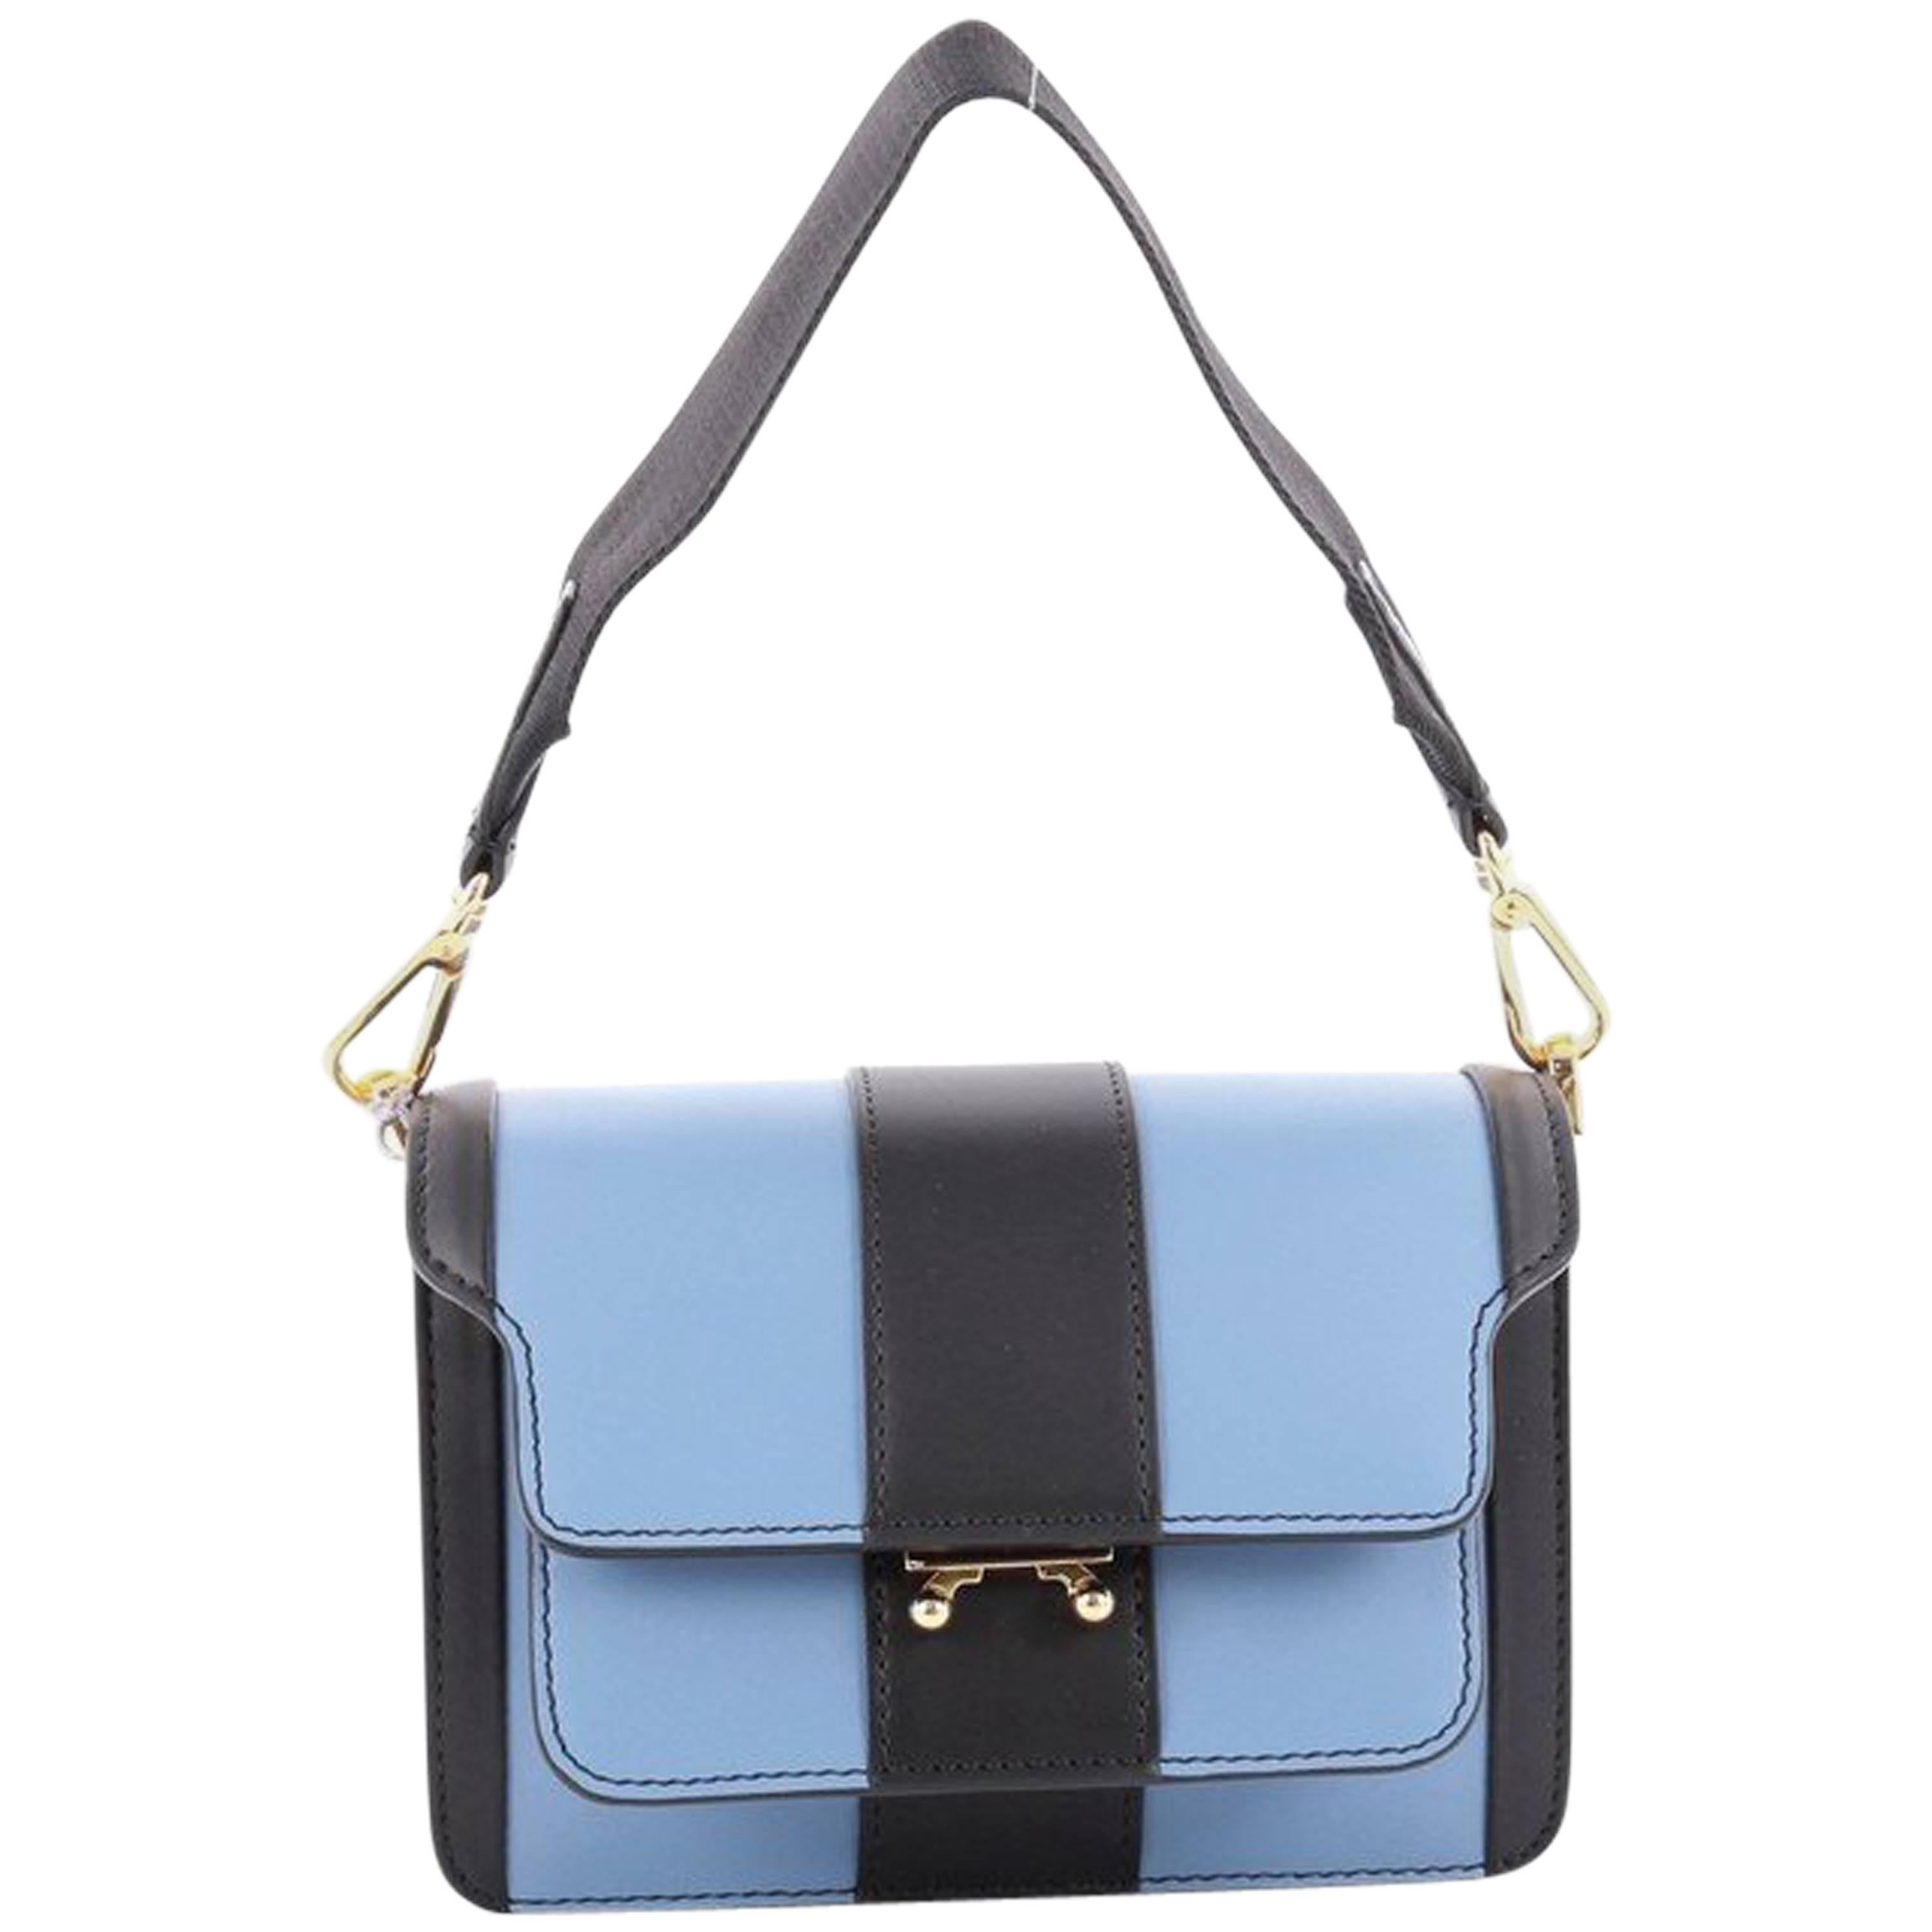 Marni Trunk - 3 For Sale on 1stDibs